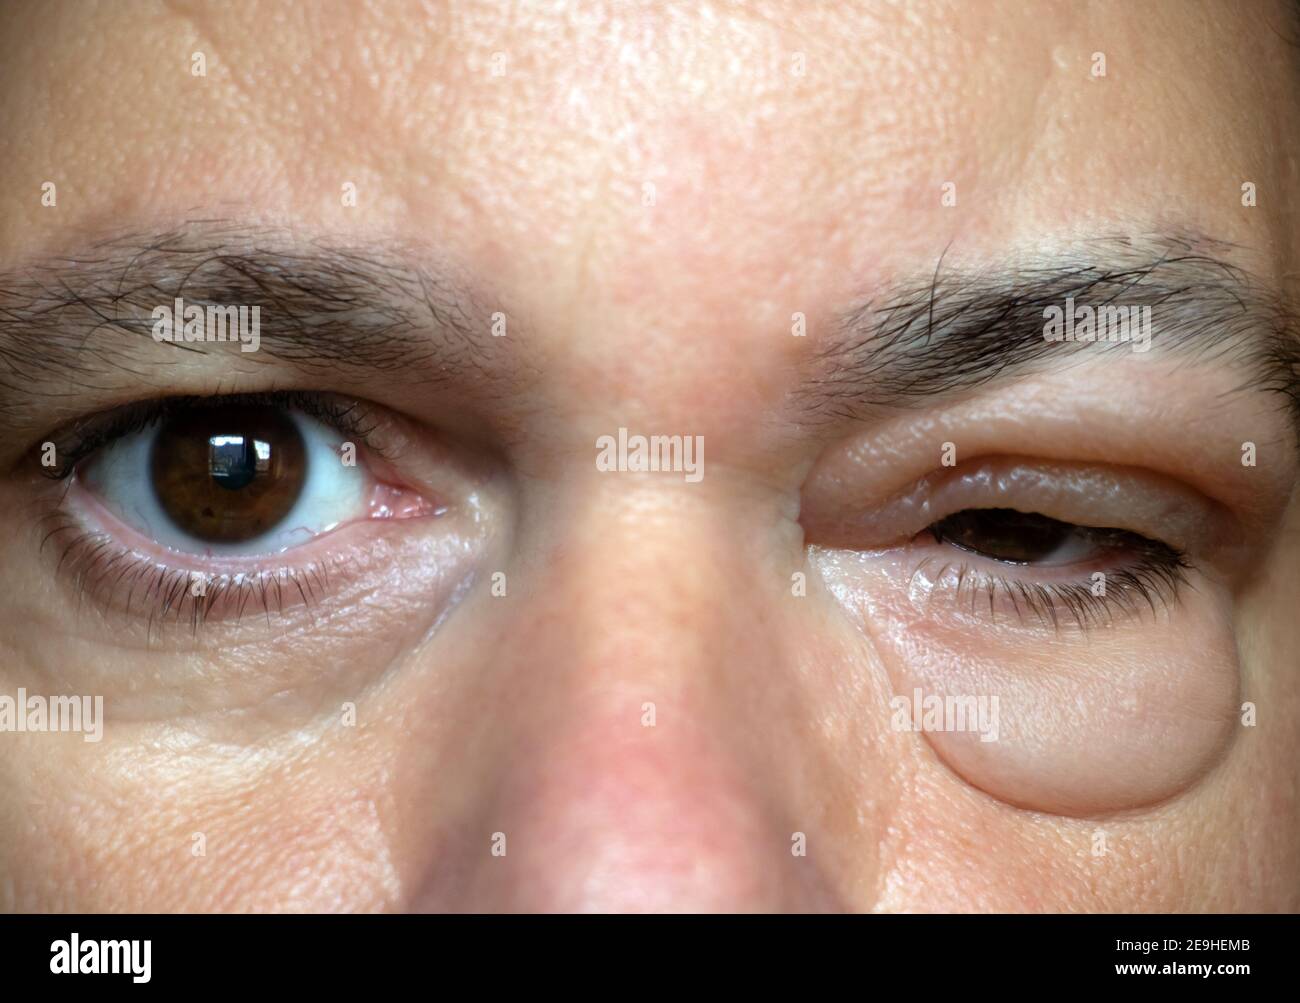 The Inflammation of the eyelid. Swelling of the eye after insect bite. A man with sick eyes. Sensitive reaction to an experimental wrinkle cream. Stock Photo